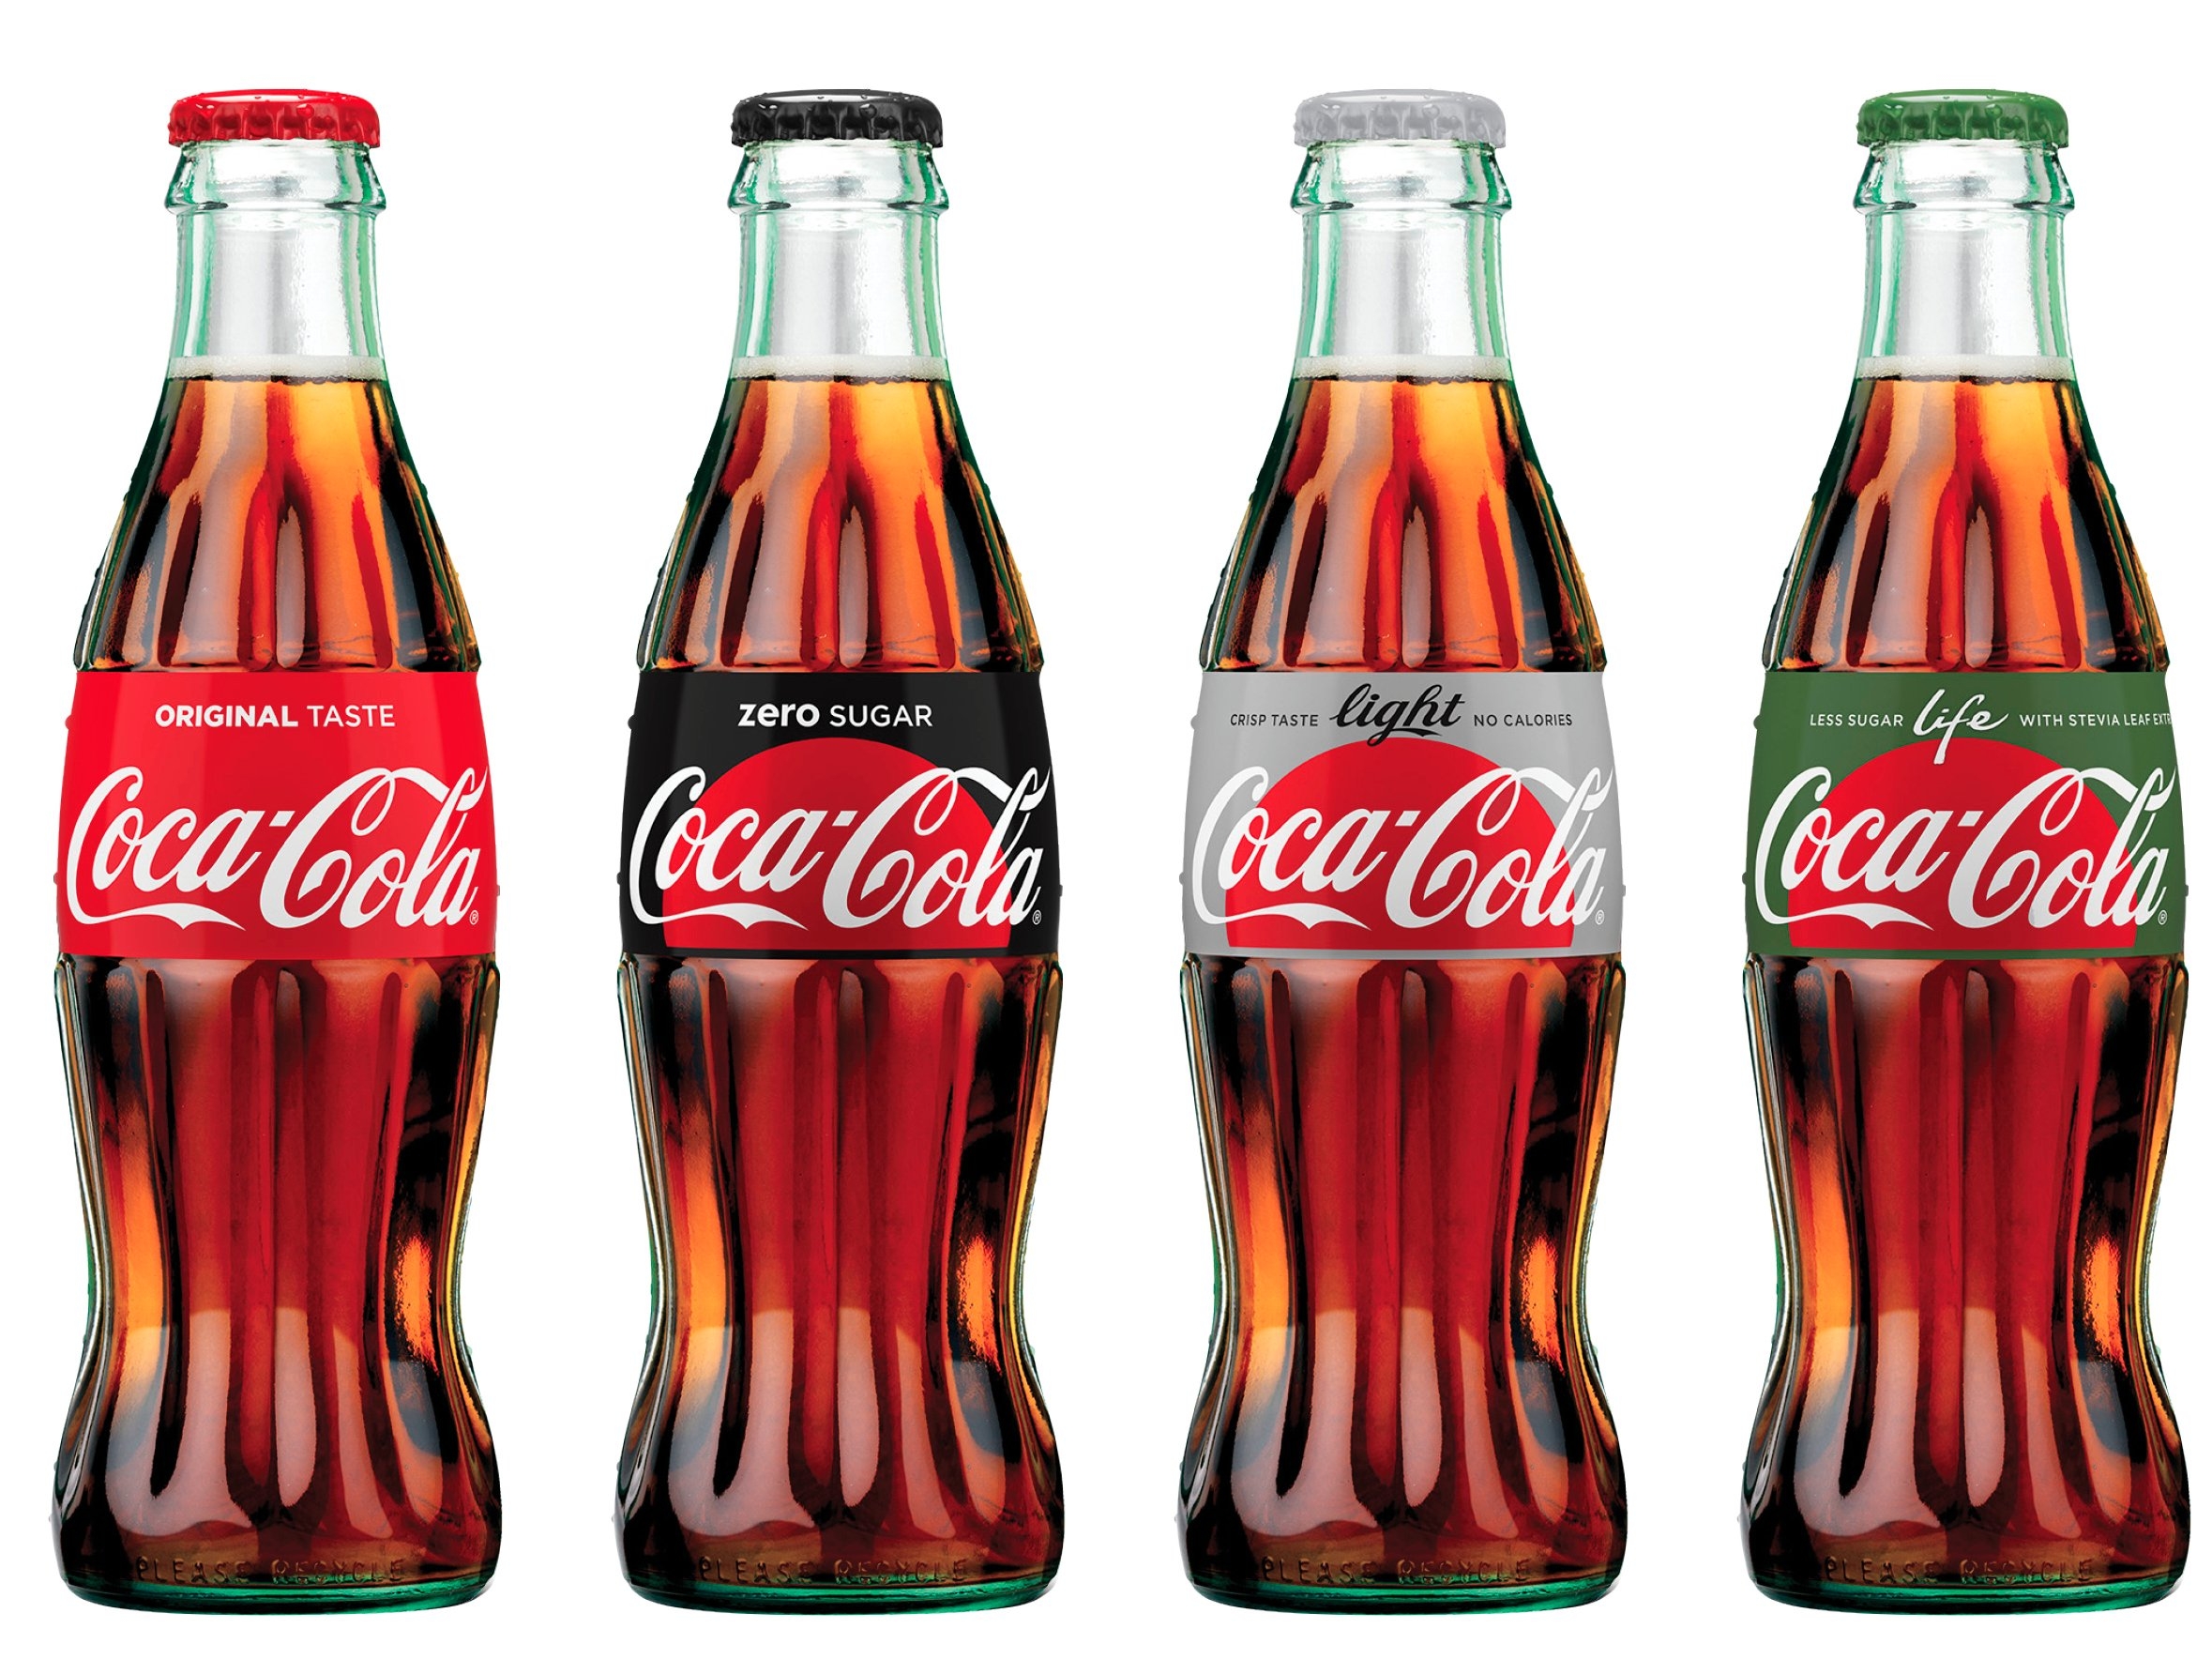 Free photo Coke bottles in different flavors.